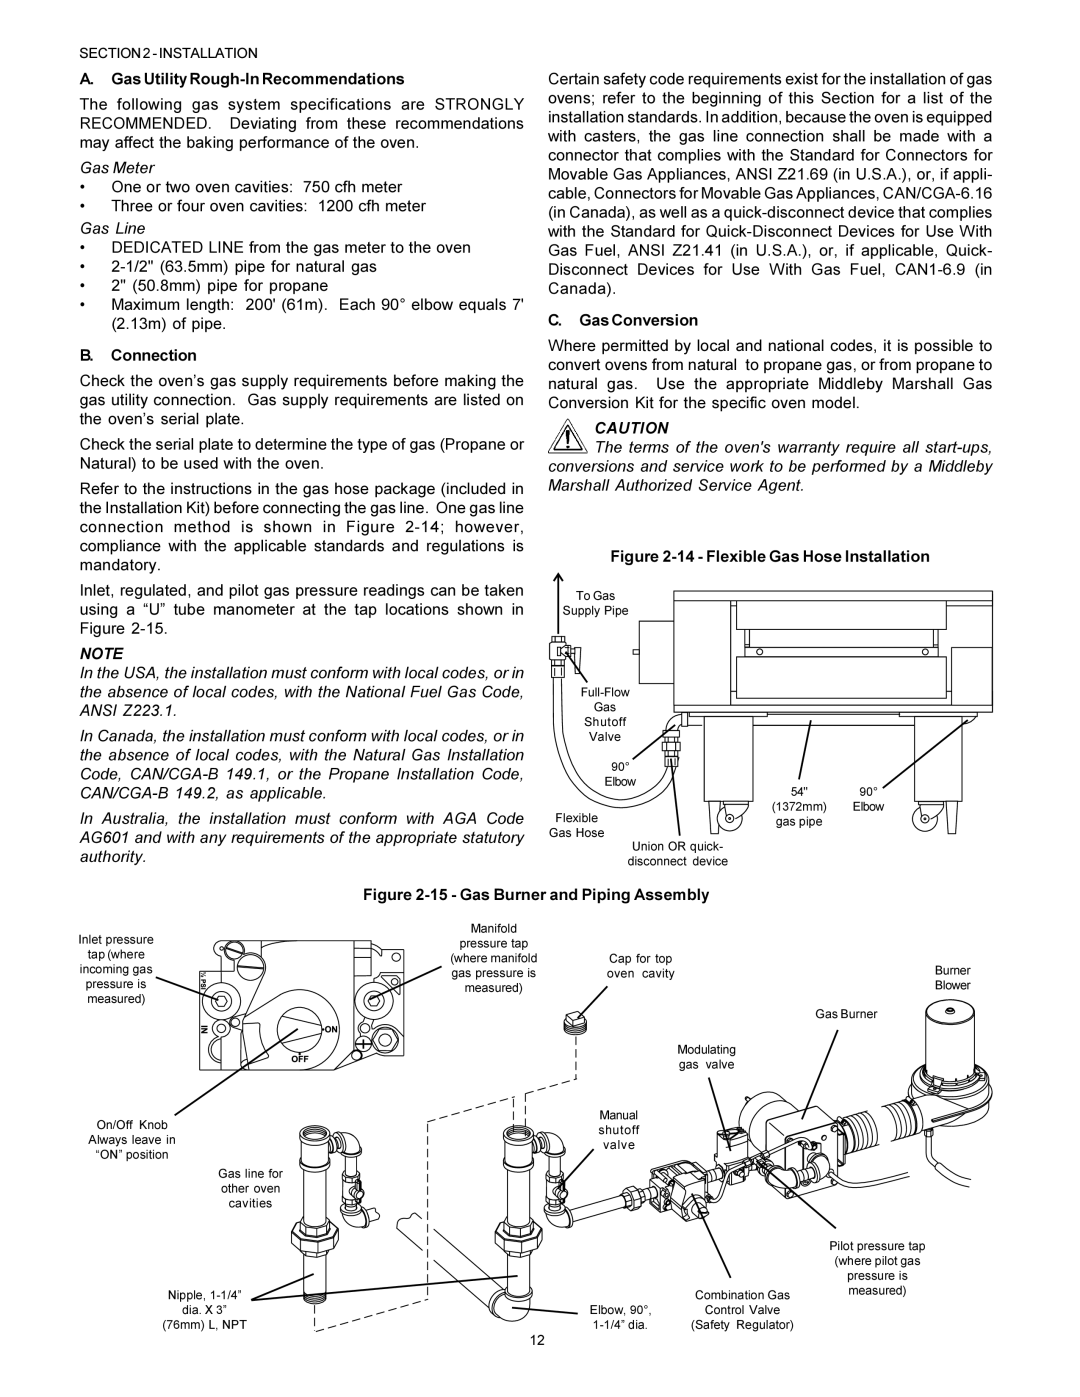 Middleby Marshall PS570S installation manual A. Gas Utility Rough-In Recommendations, B. Connection, C. Gas Conversion 